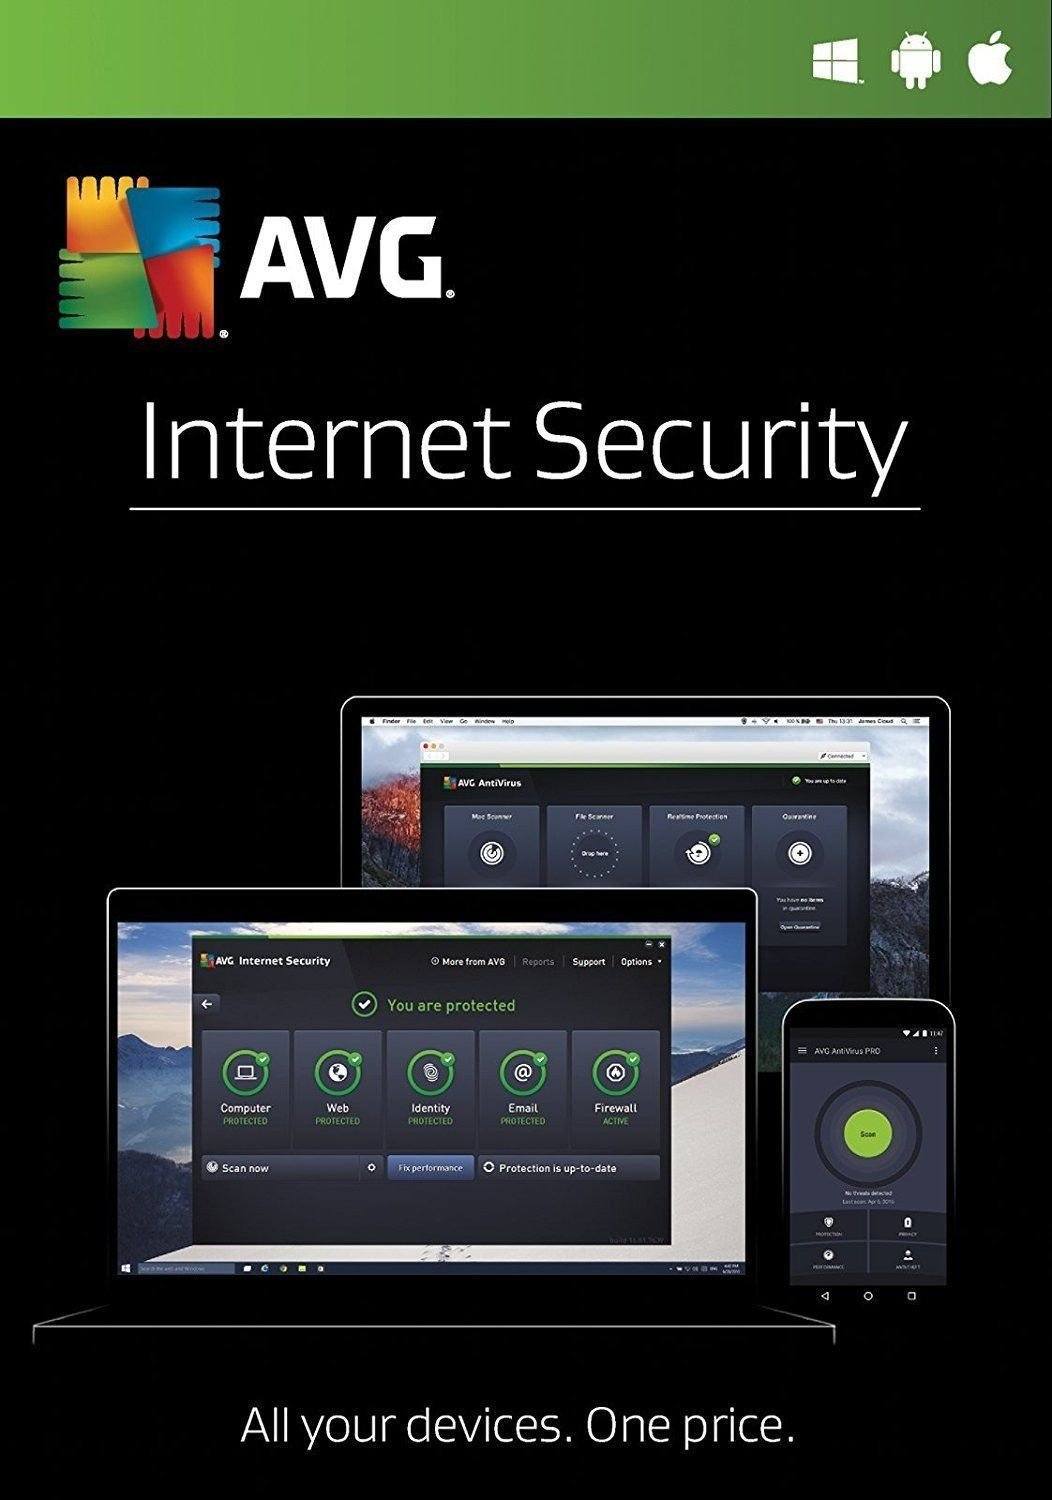 Cheap Antivirus DOWNLOAD AVG Internet Security - Windows + Android + Apple - InterSecure 